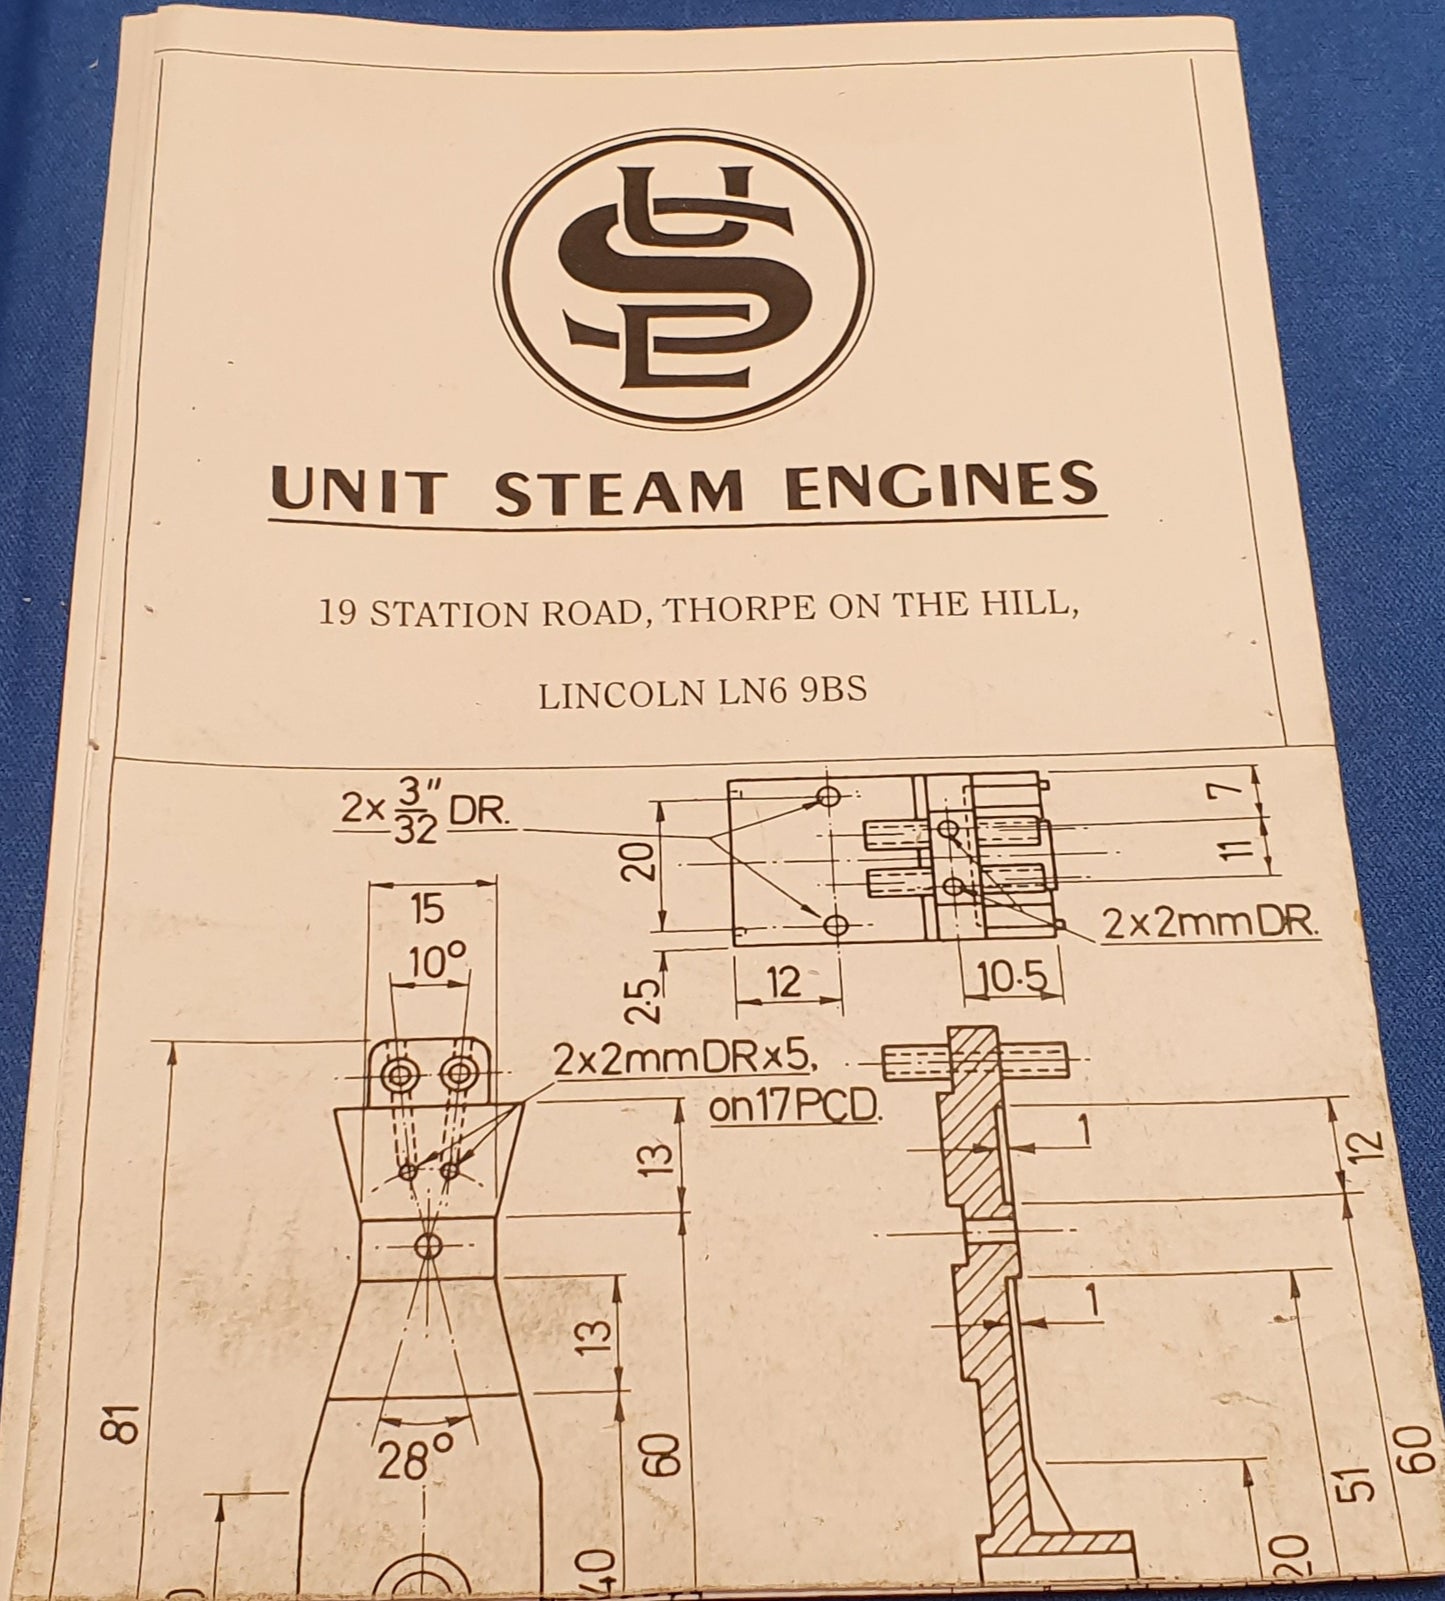 Steam Engine - USE Kit No3 Parted machined.